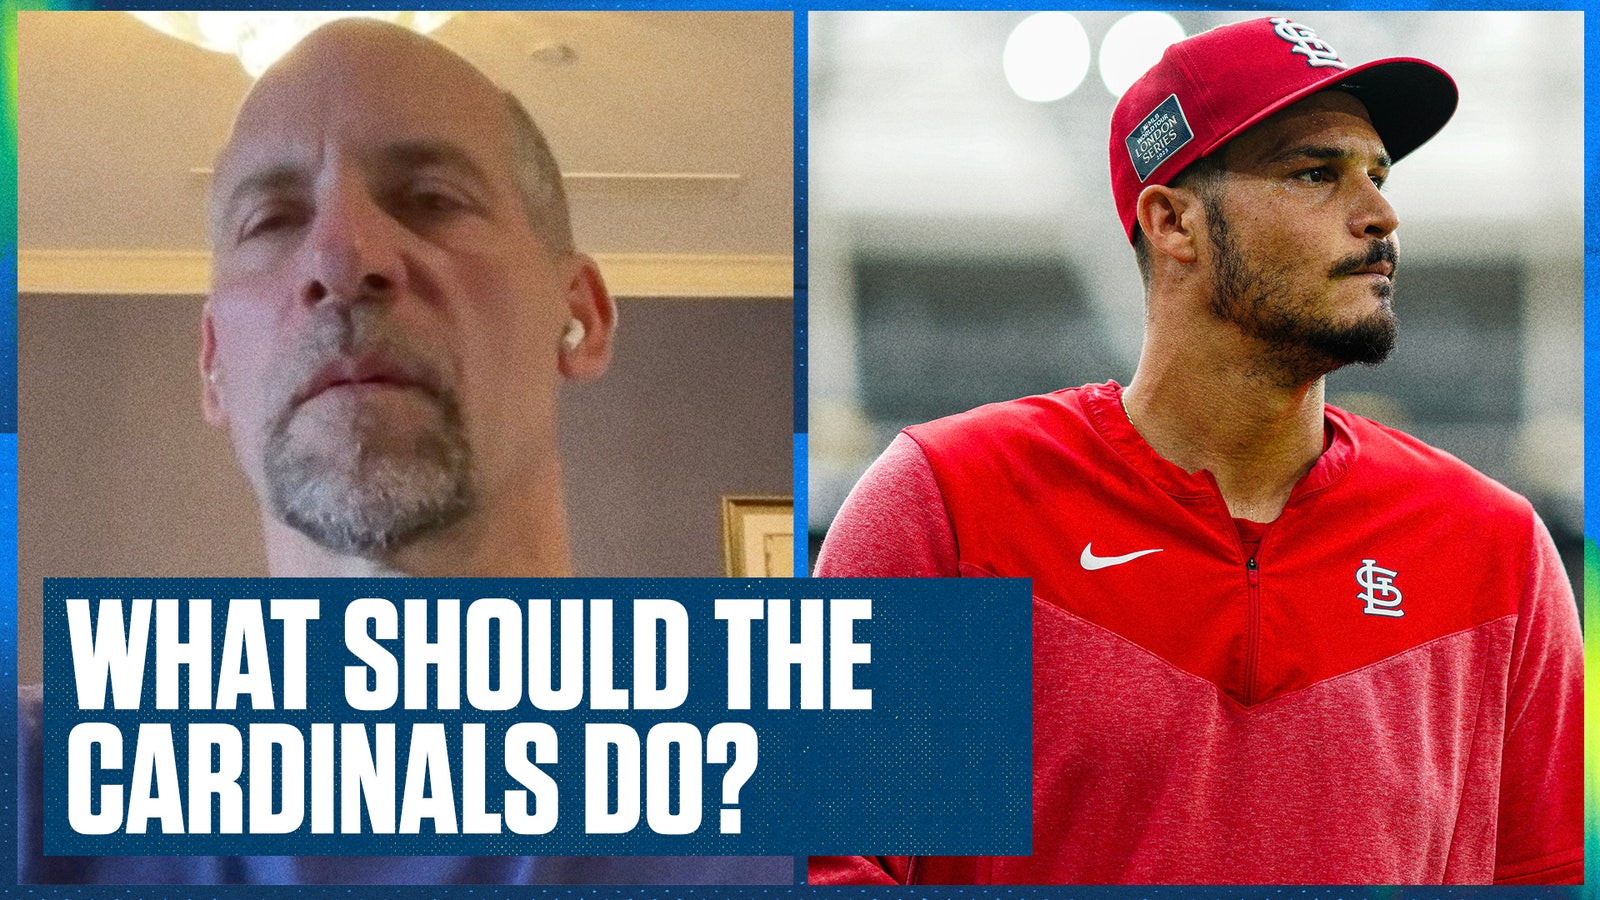 John Smoltz on what the St. Louis Cardinals should do at the trade deadline